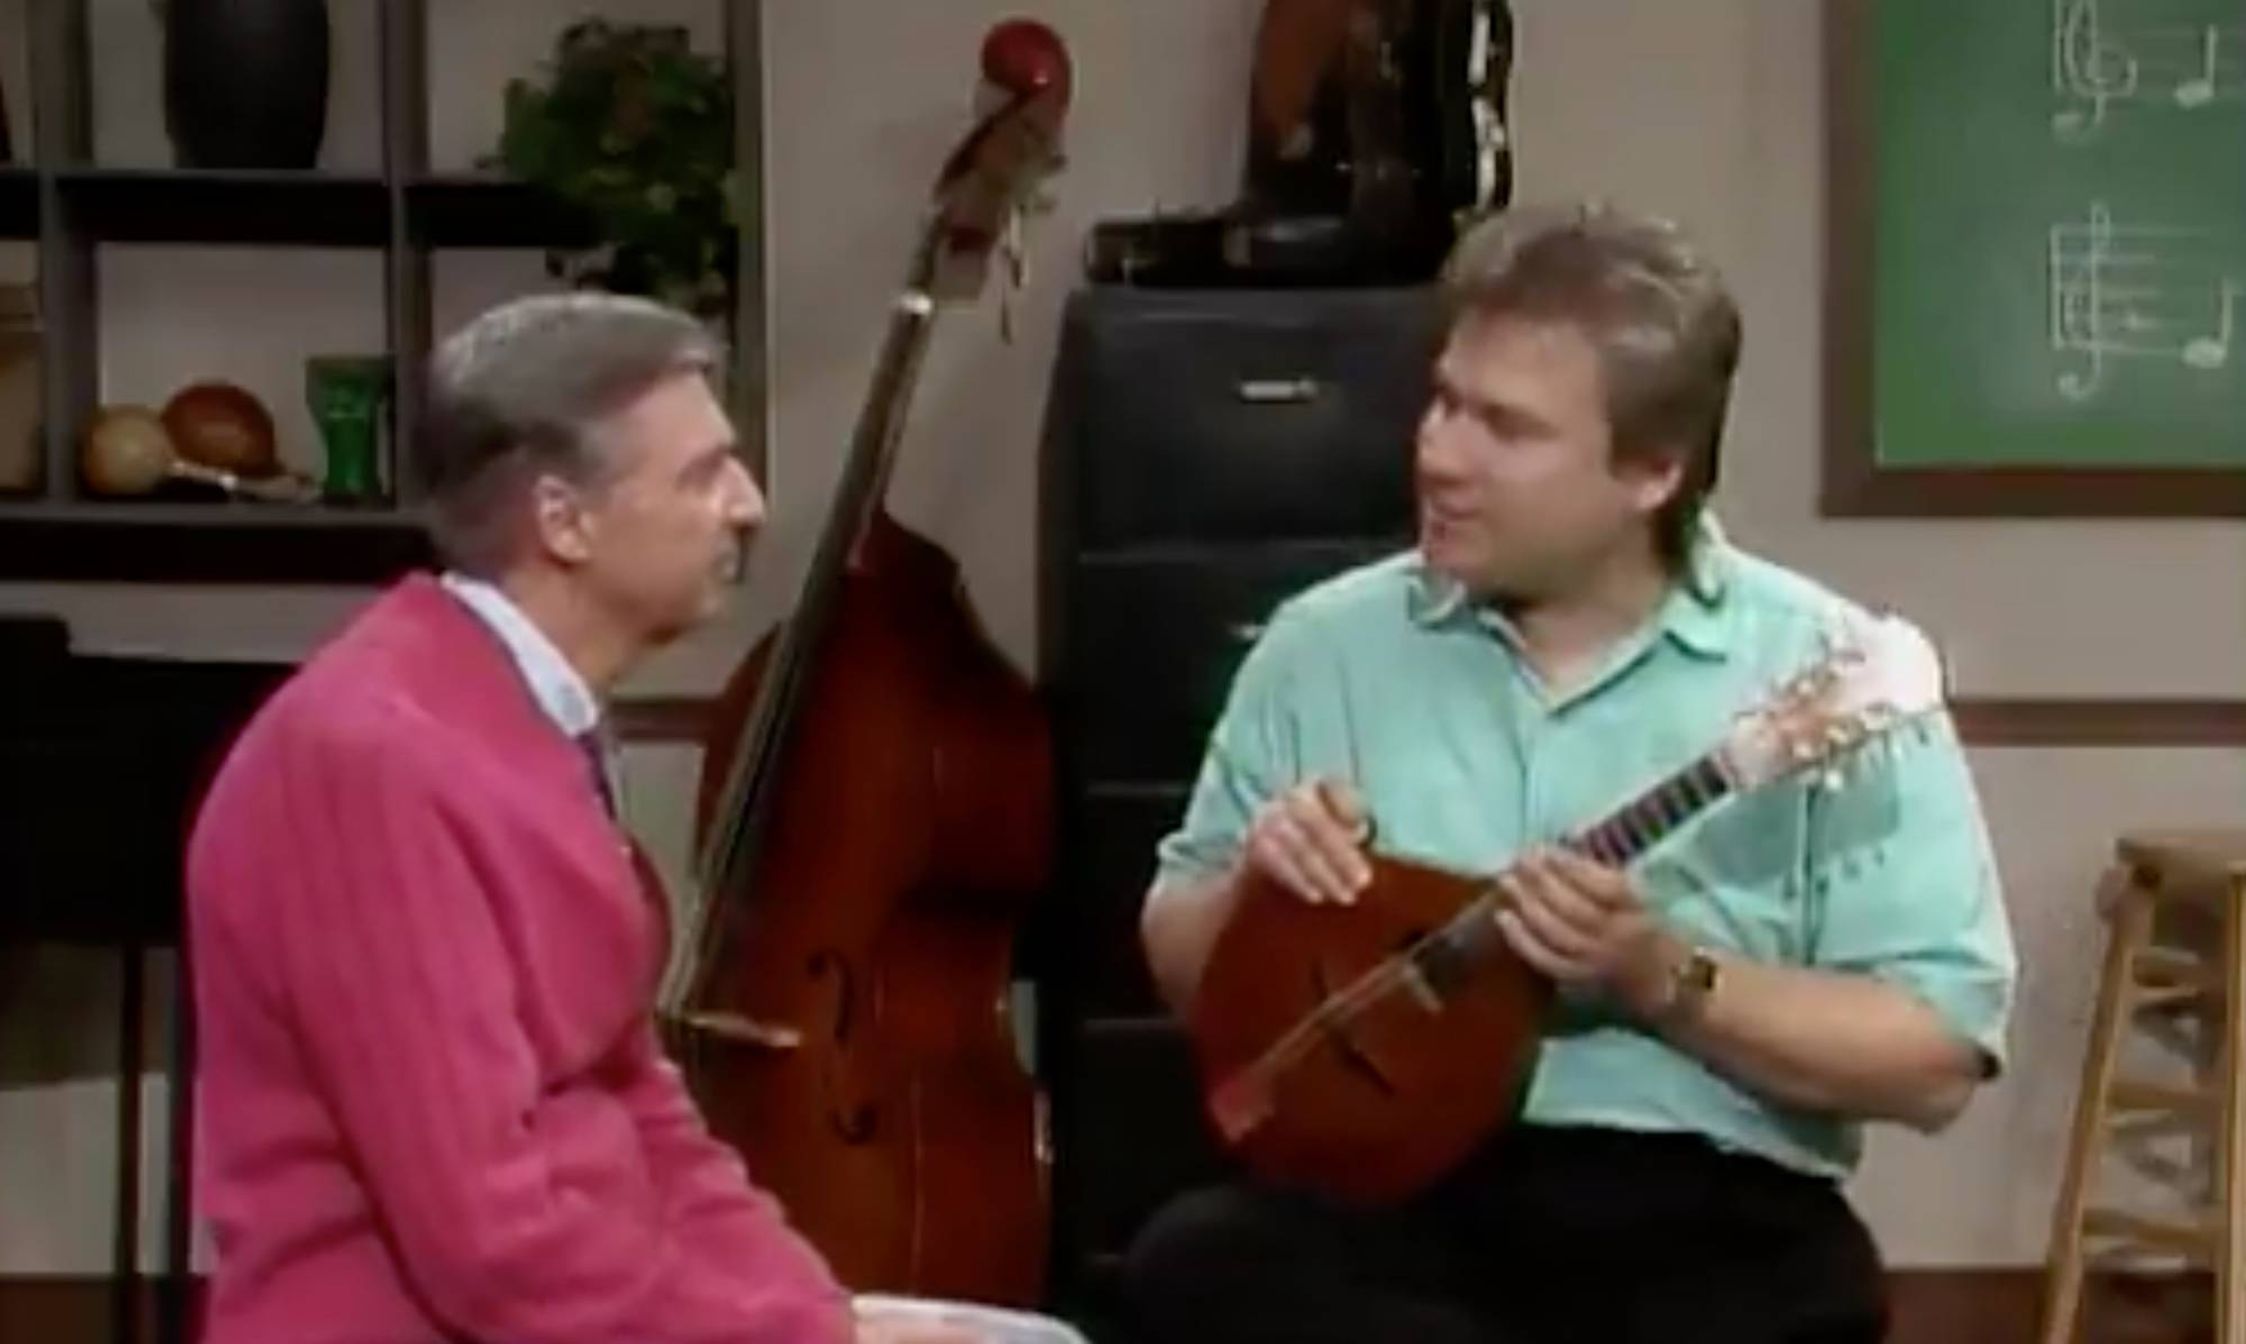 Freeze frame of Mister Rogers and Peter Ostroushko from 1993.